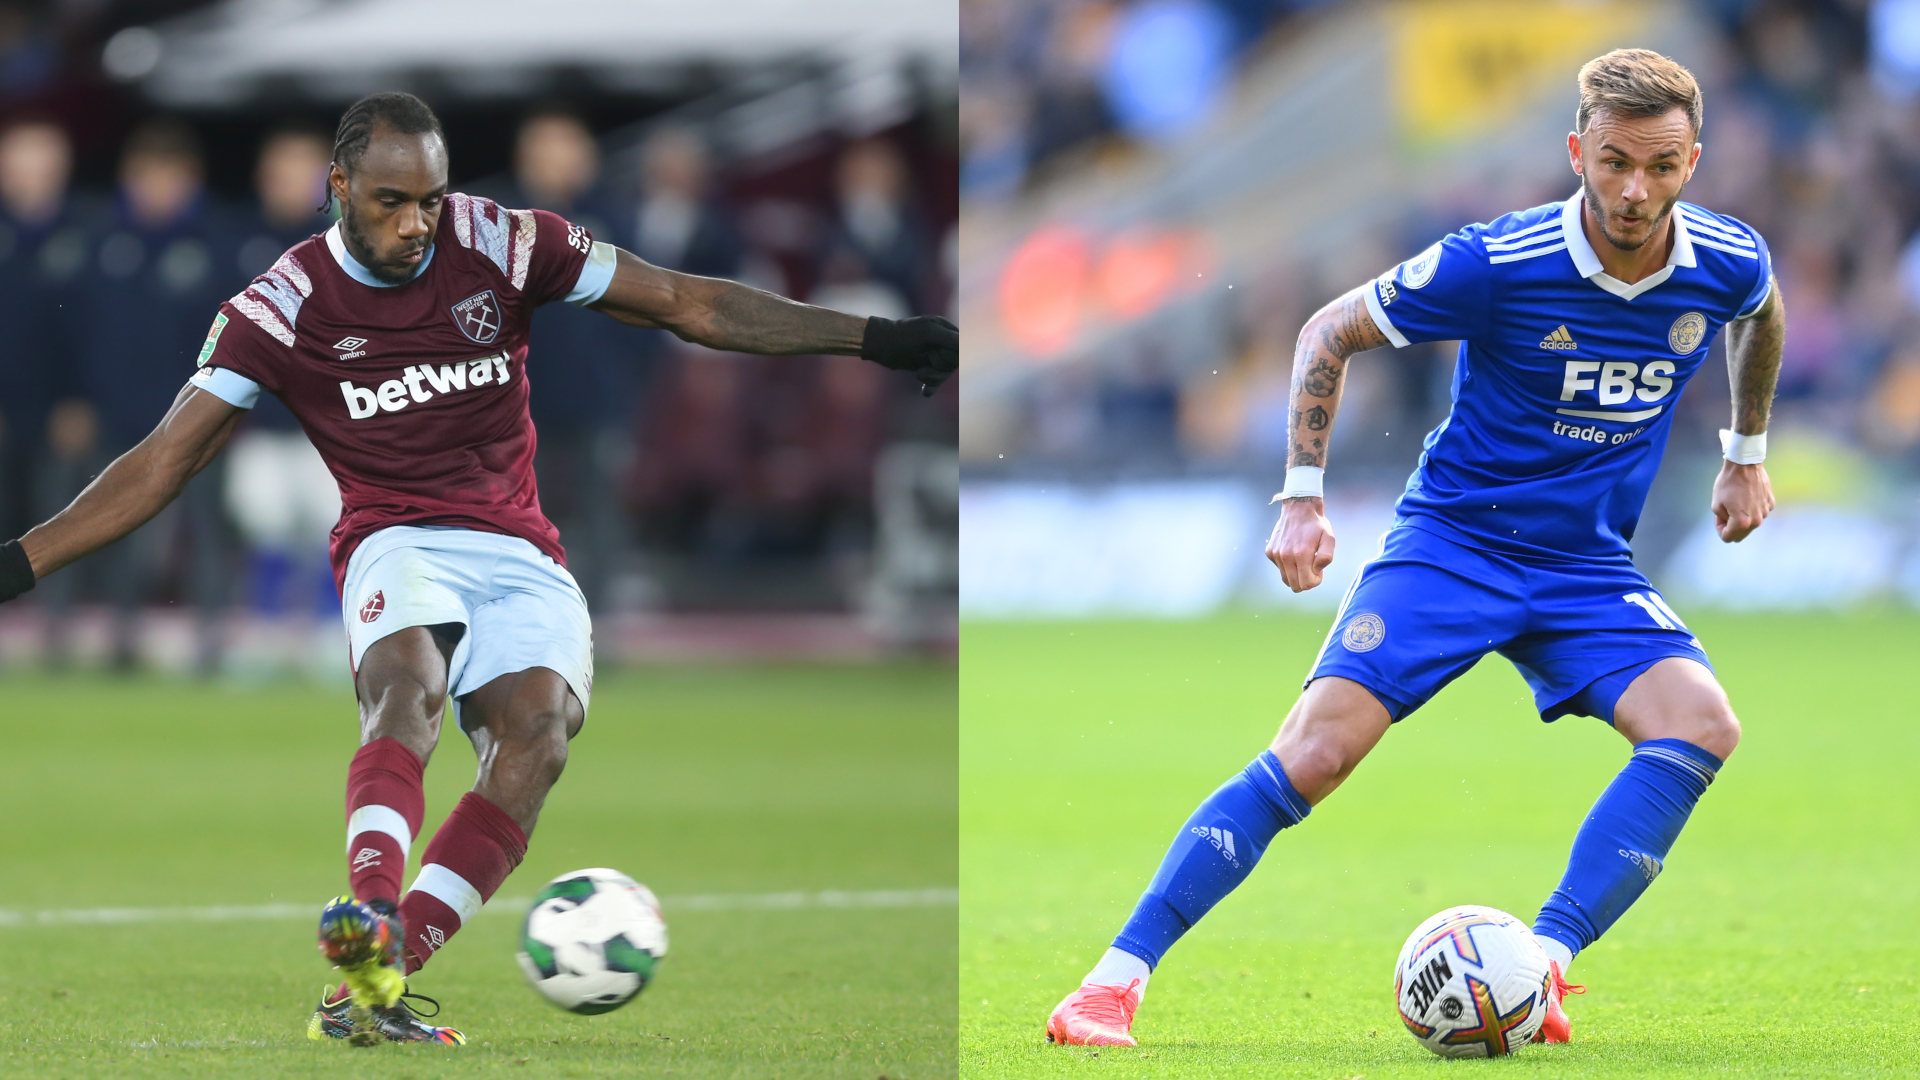 West Ham vs Leicester live stream how to watch Premier League online and on TV from anywhere, team news TechRadar